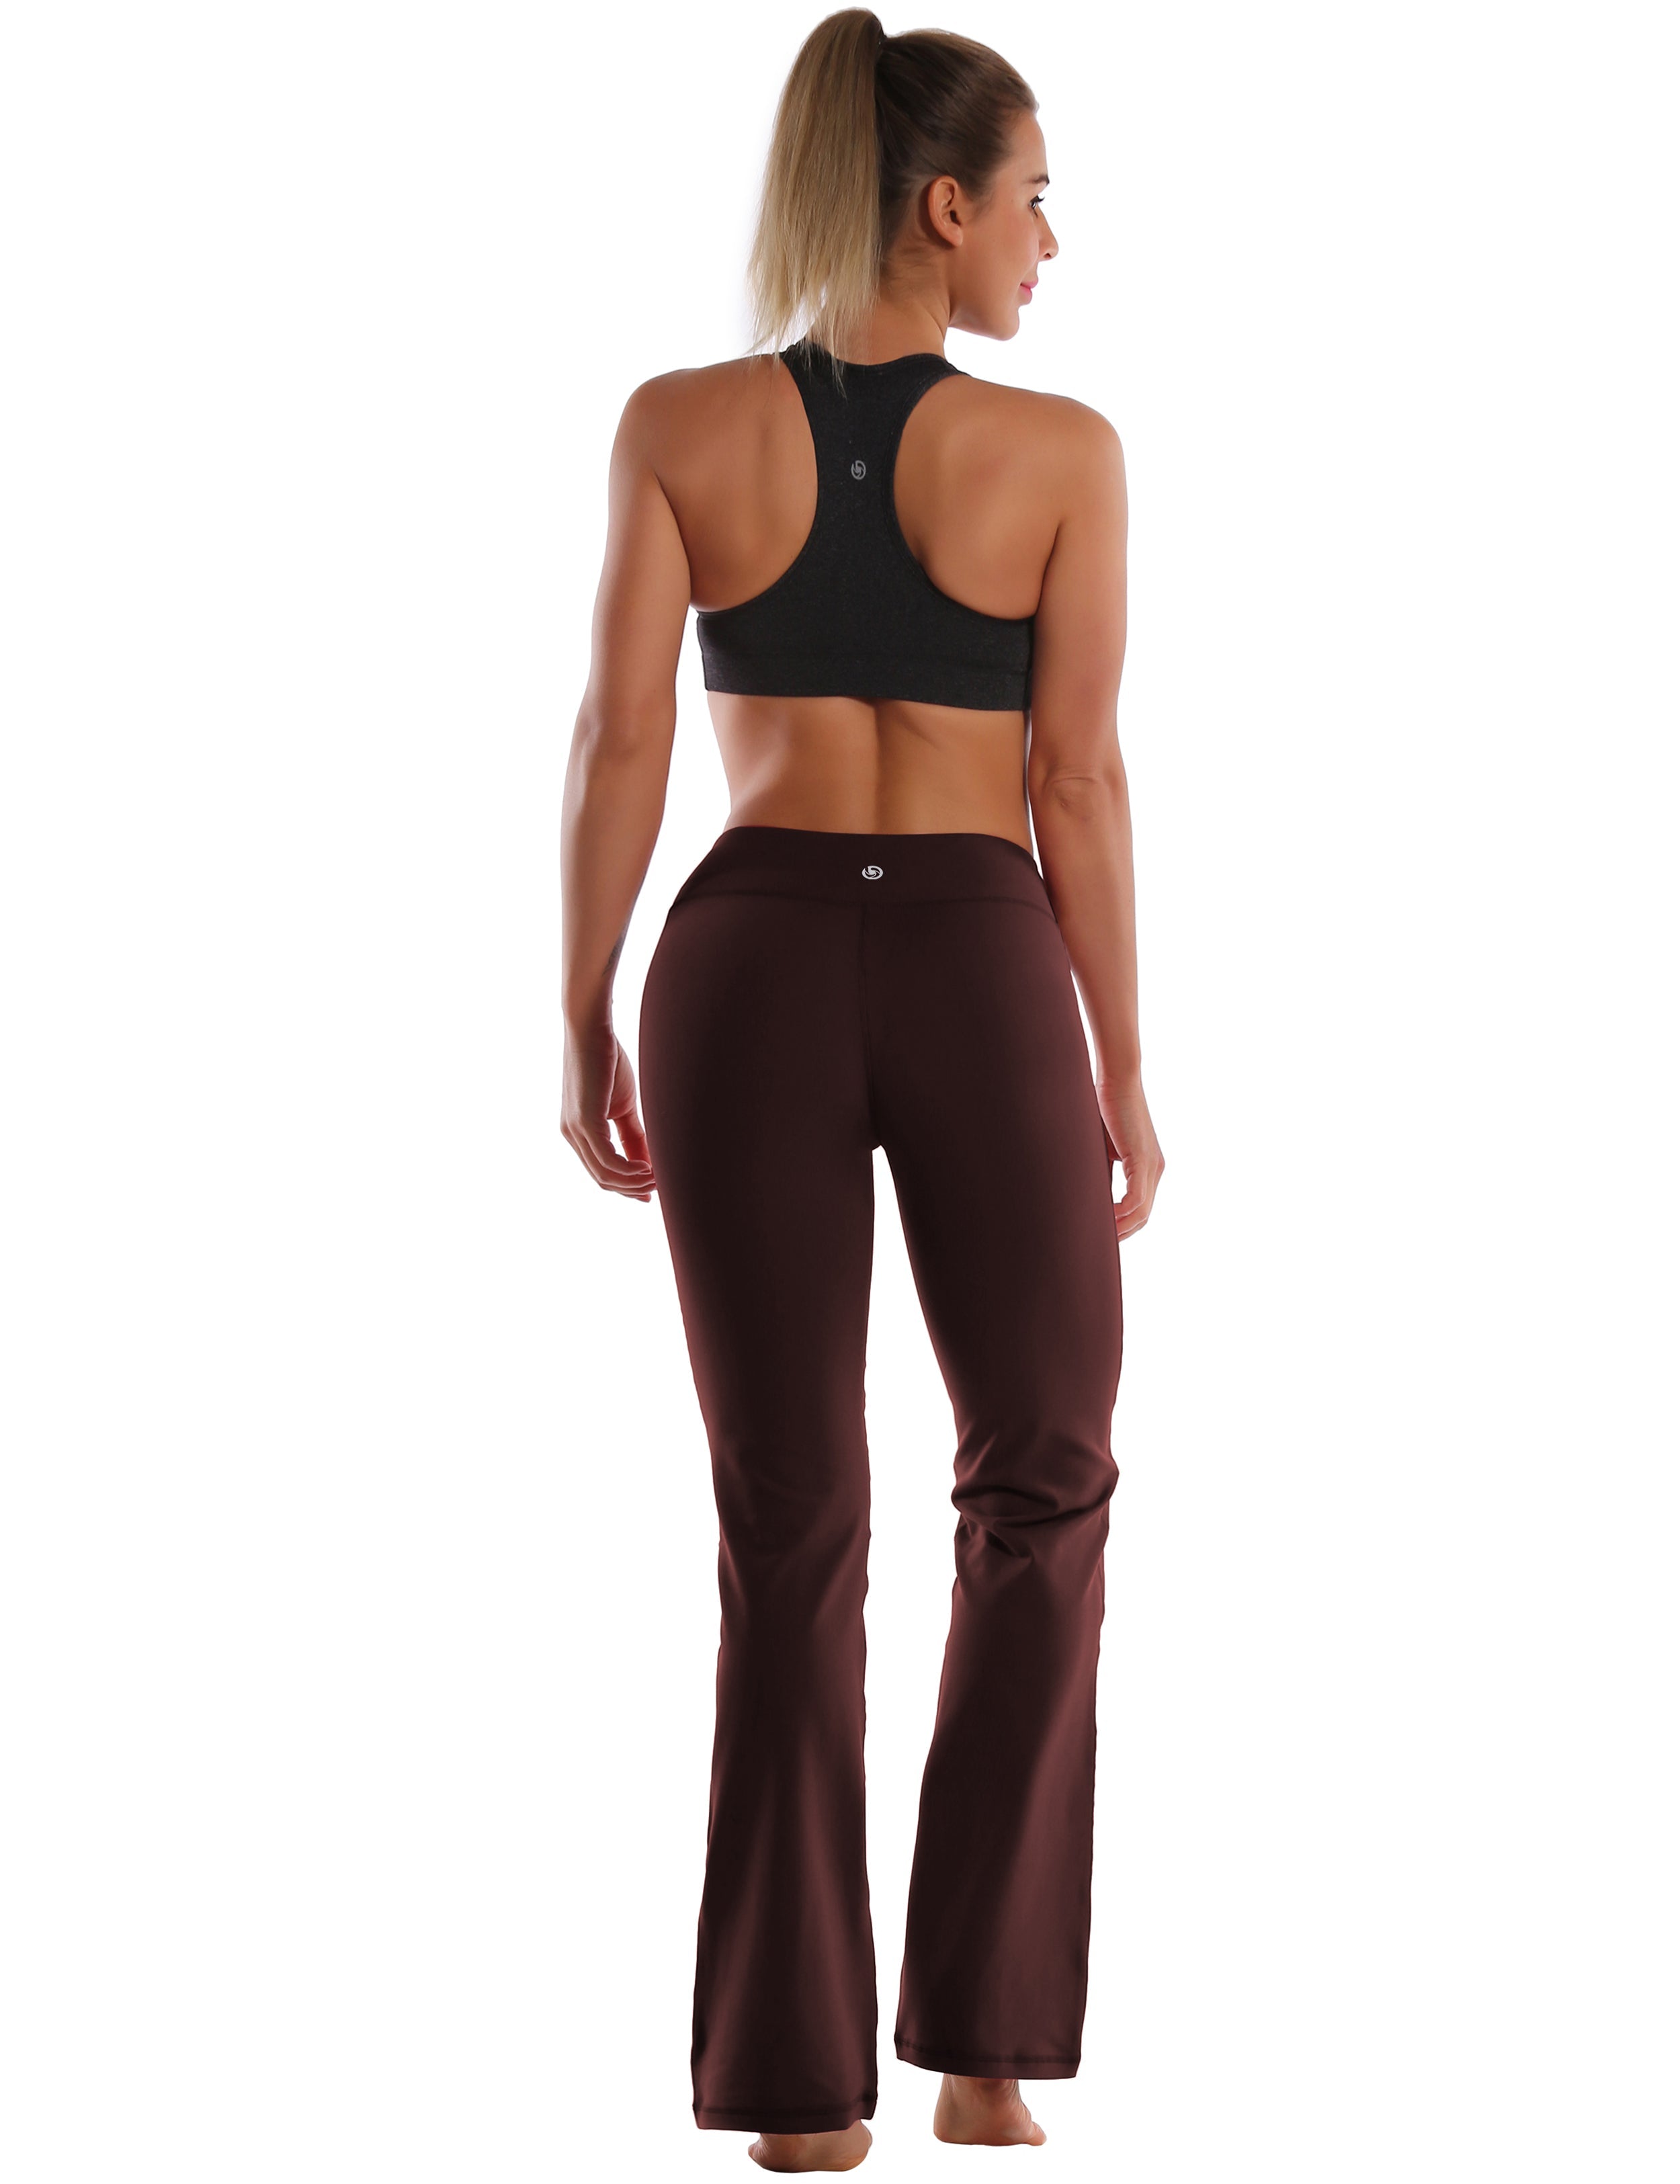 Cotton Nylon Bootcut Leggings mahoganymaroon 87%Nylon/13%Spandex (Super soft, cotton feel , 280gsm) Fabric doesn't attract lint easily 4-way stretch No see-through Moisture-wicking Inner pocket Four lengths